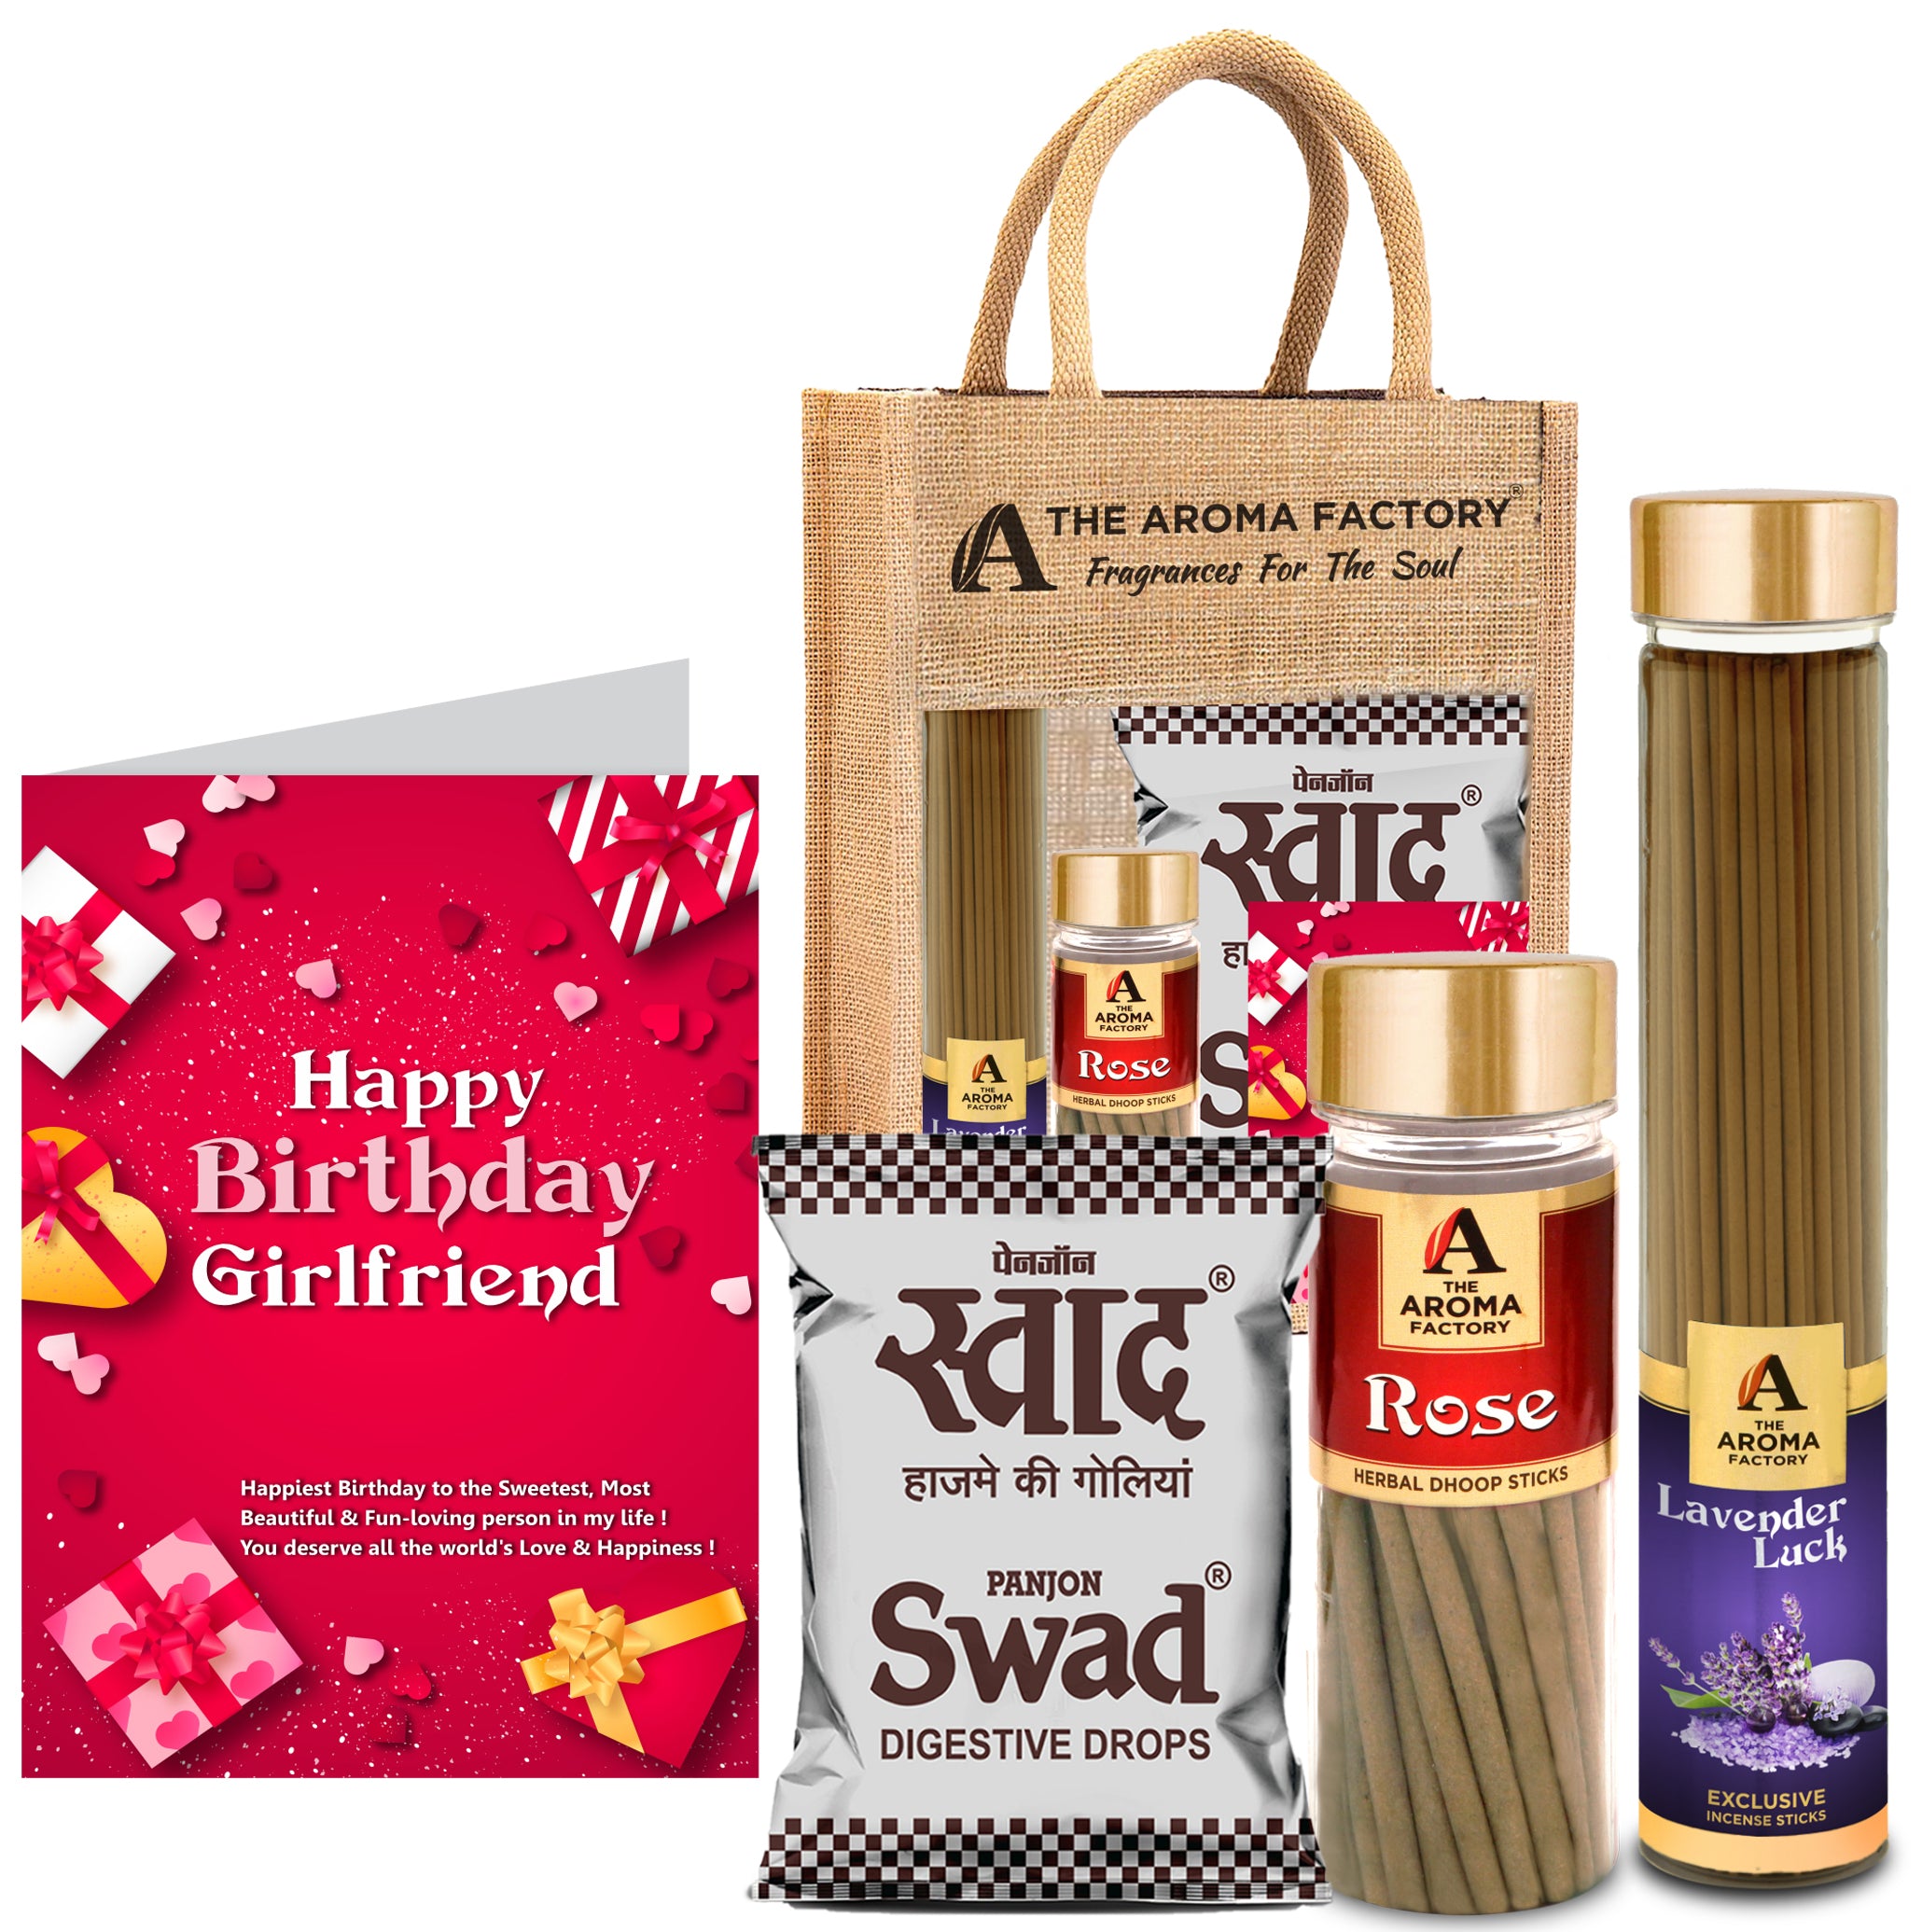 The Aroma Factory Happy Birthday Girl Friend Gift with Card (25 Swad Candy, Lavender Agarbatti Bottle, Rose Dhoopbatti) in Jute Bag